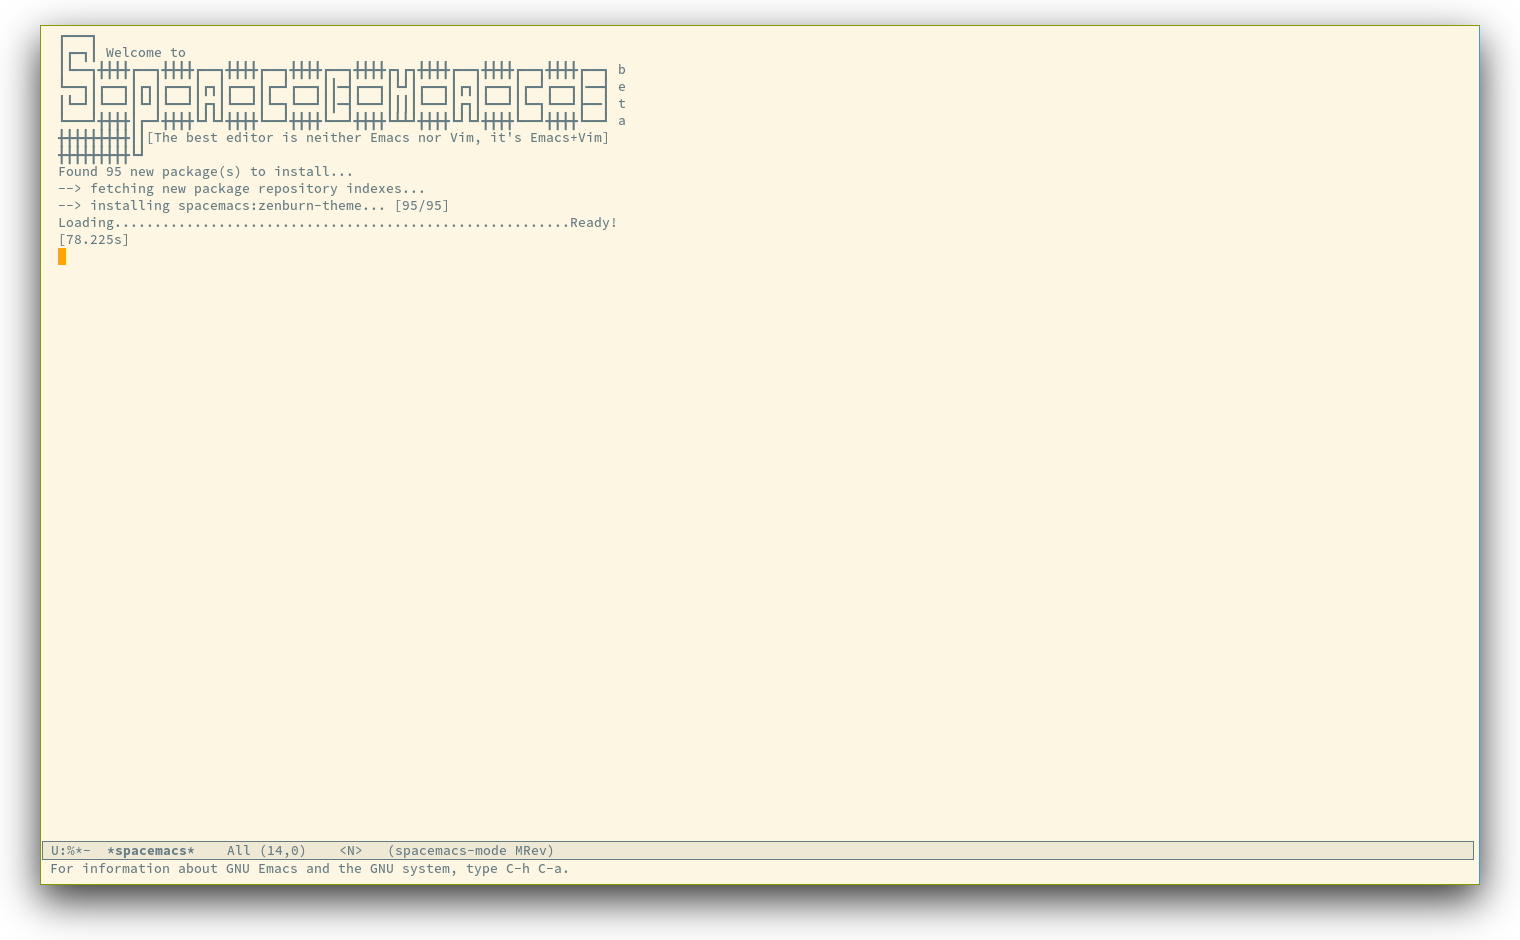 /TakeV/spacemacs/media/commit/6f4a8defac83c02d3b3c7d3d9393153782165a95/doc/img/spacemacs-startup.png